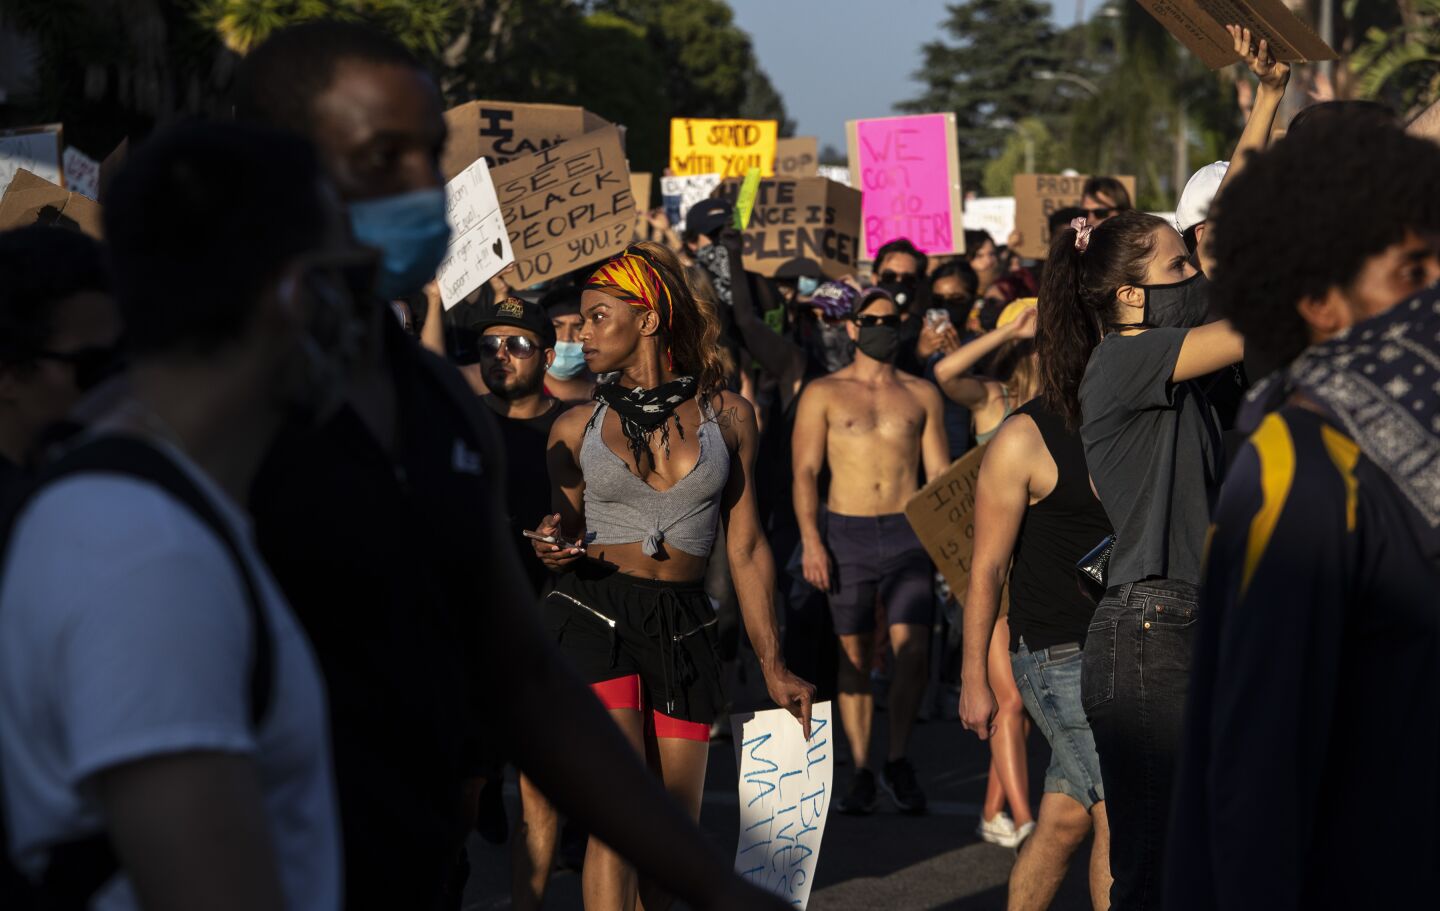 Protesters walk through a residential neighborhood in Hollywood.